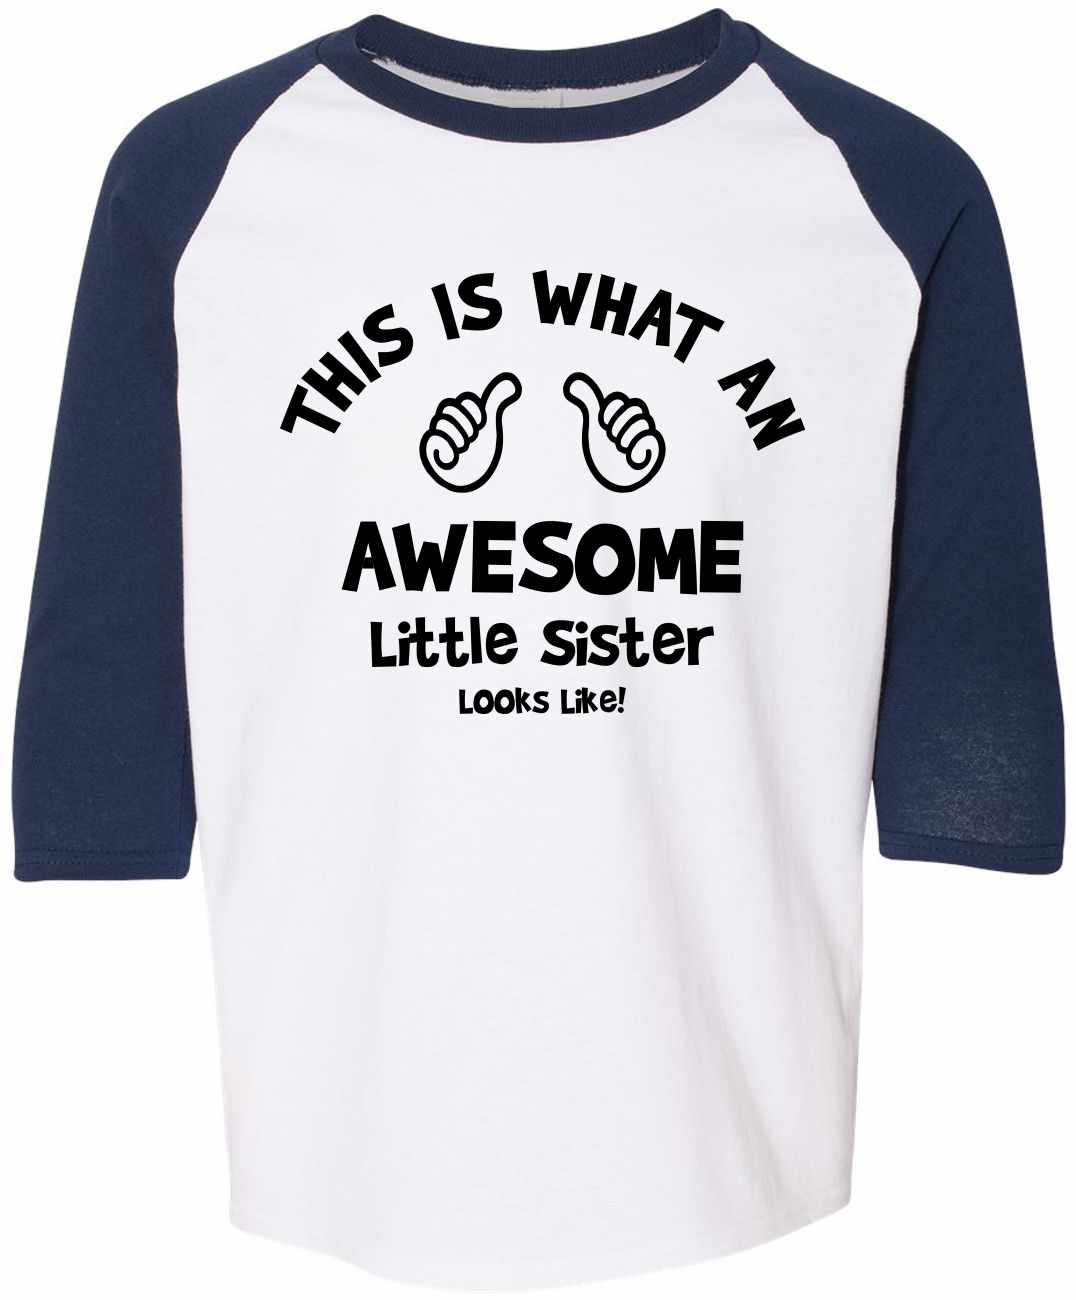 This is What an AWESOME LITTLE SISTER Looks Like on Youth Baseball Shirt (#1037-212)